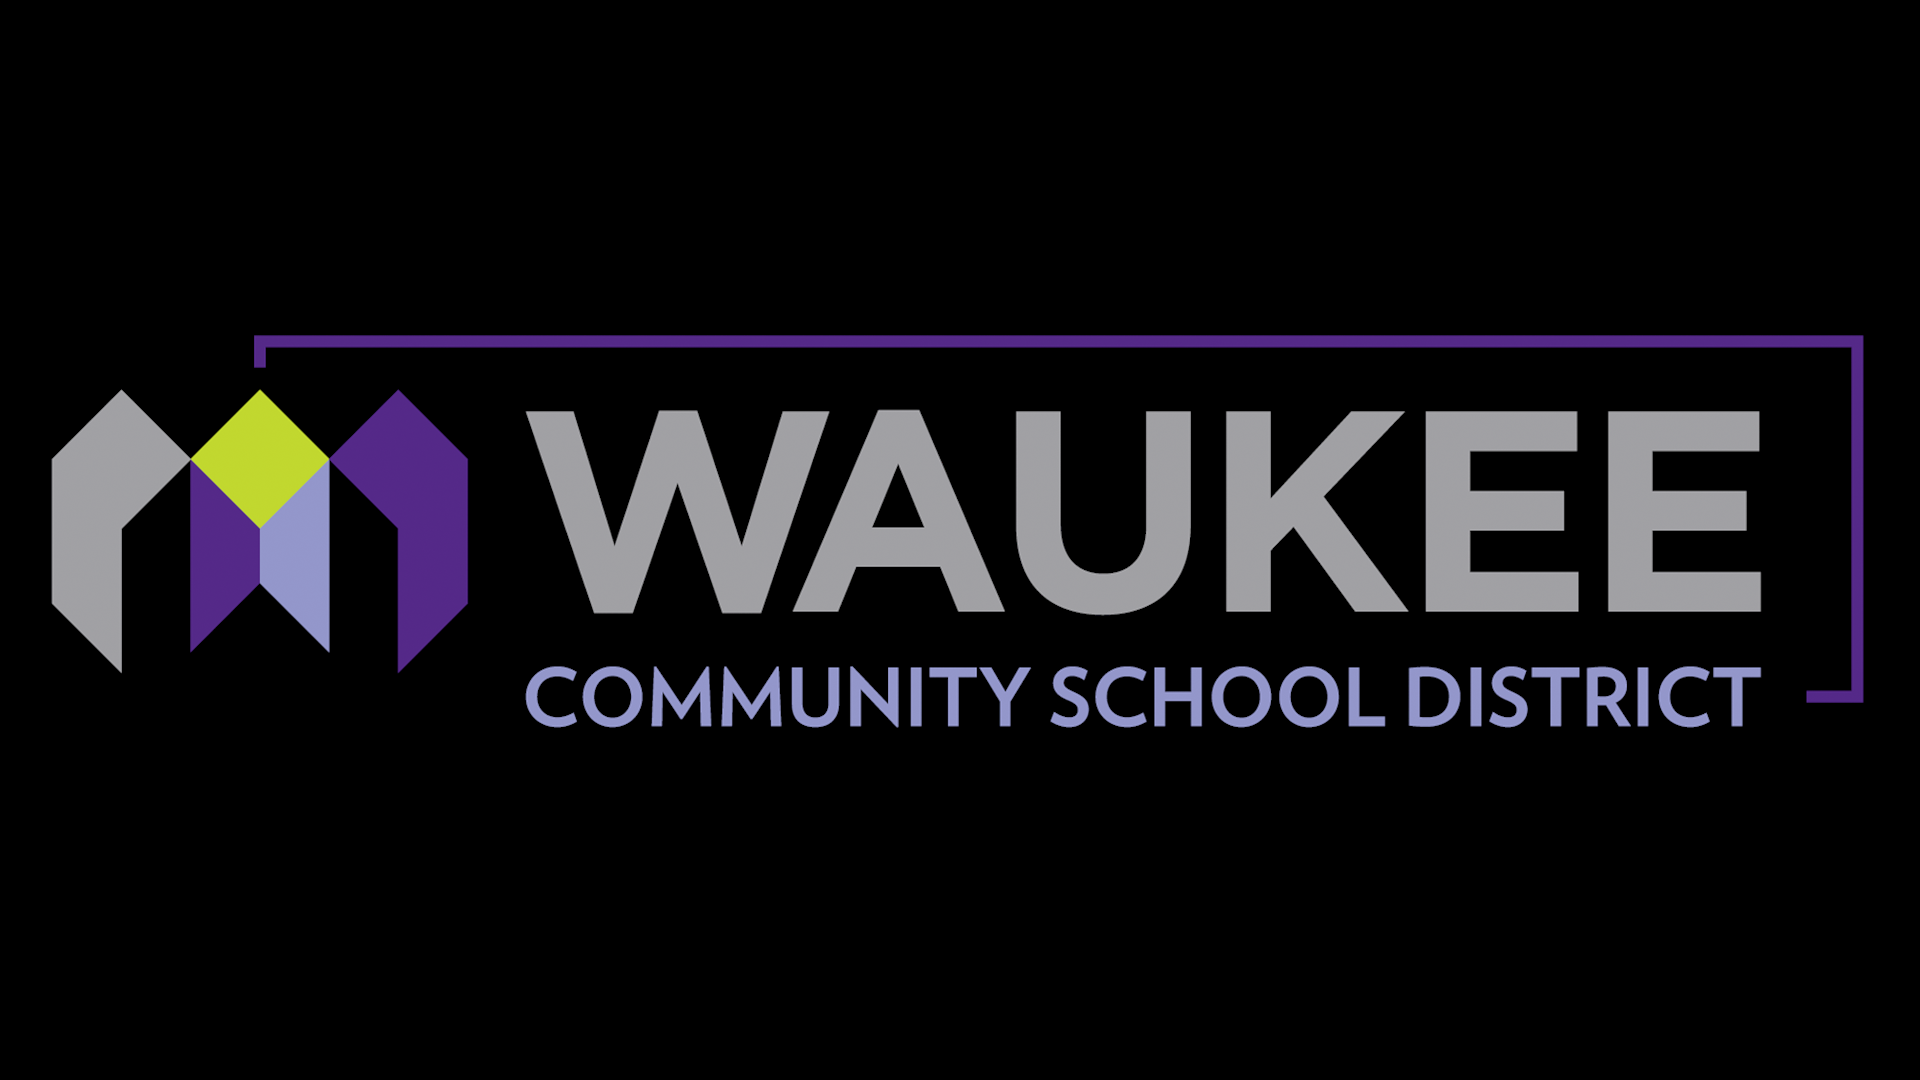 Dr. Brad Buck, currently the superintendent of the Waukee Community School District, used to lead the Iowa Department of Education.